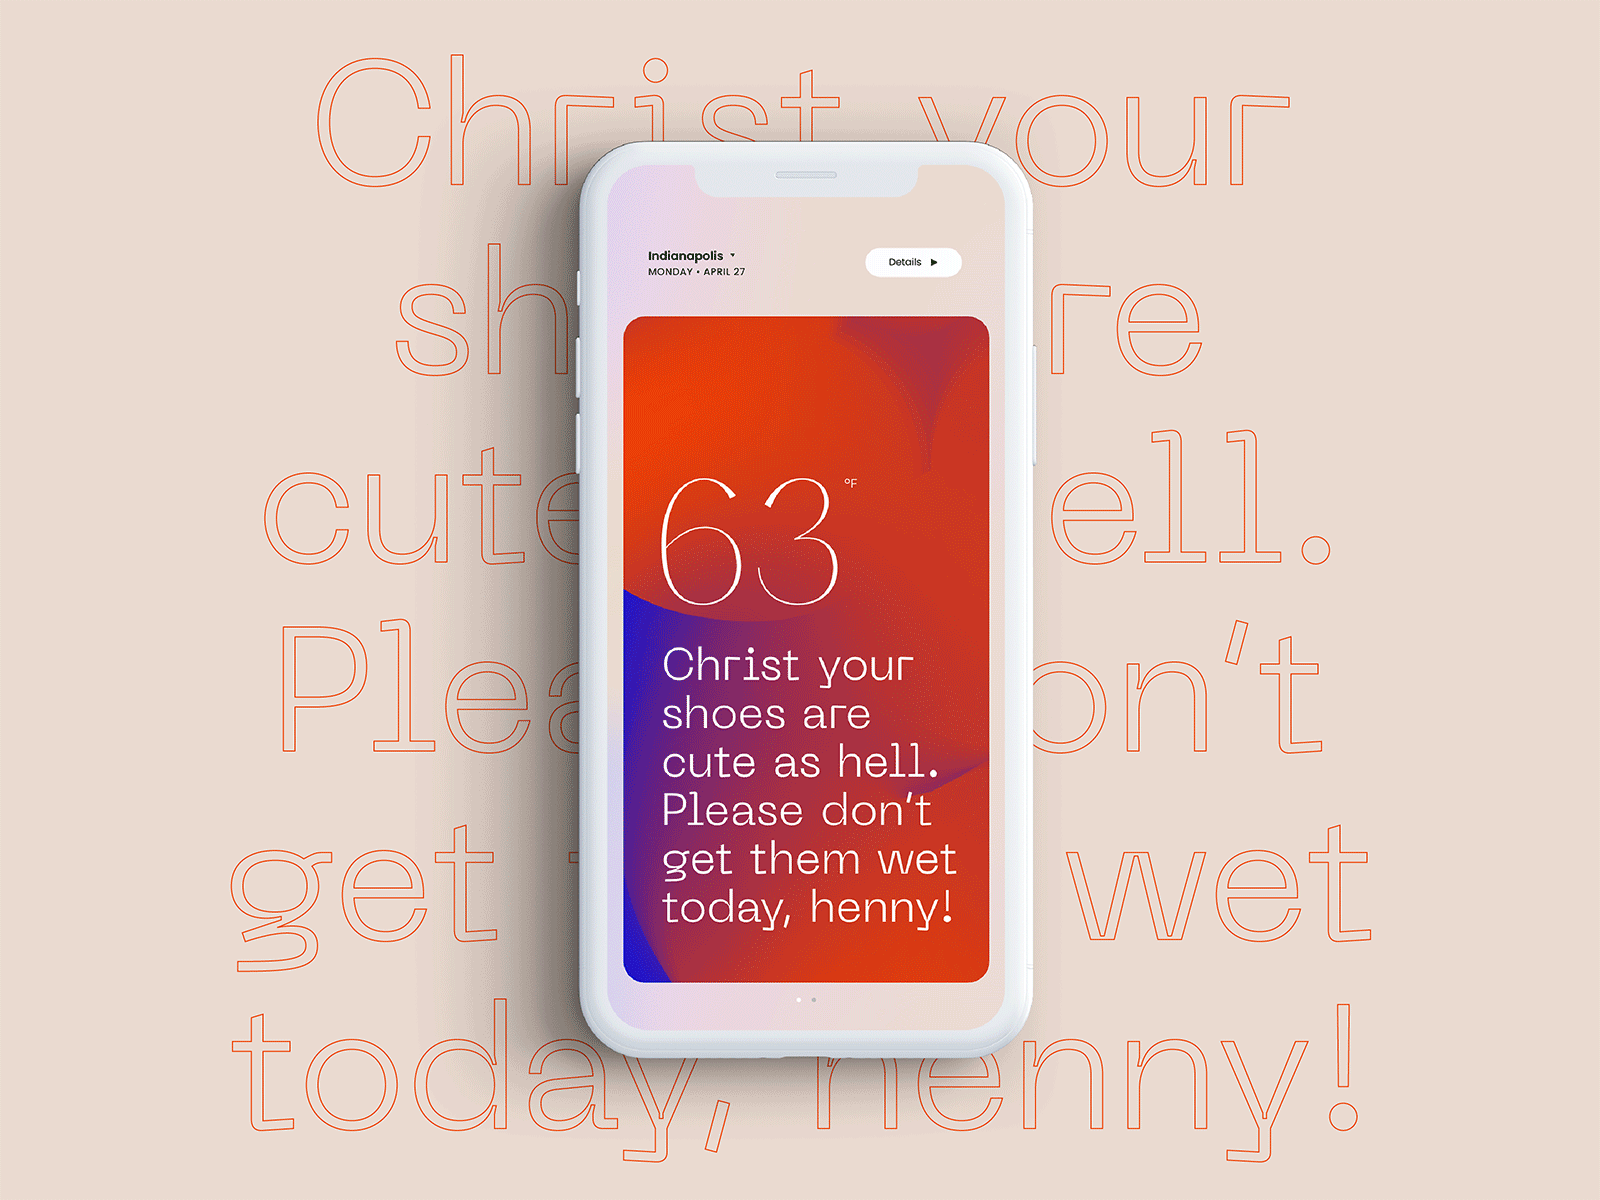 A Very Fabulous Weather App